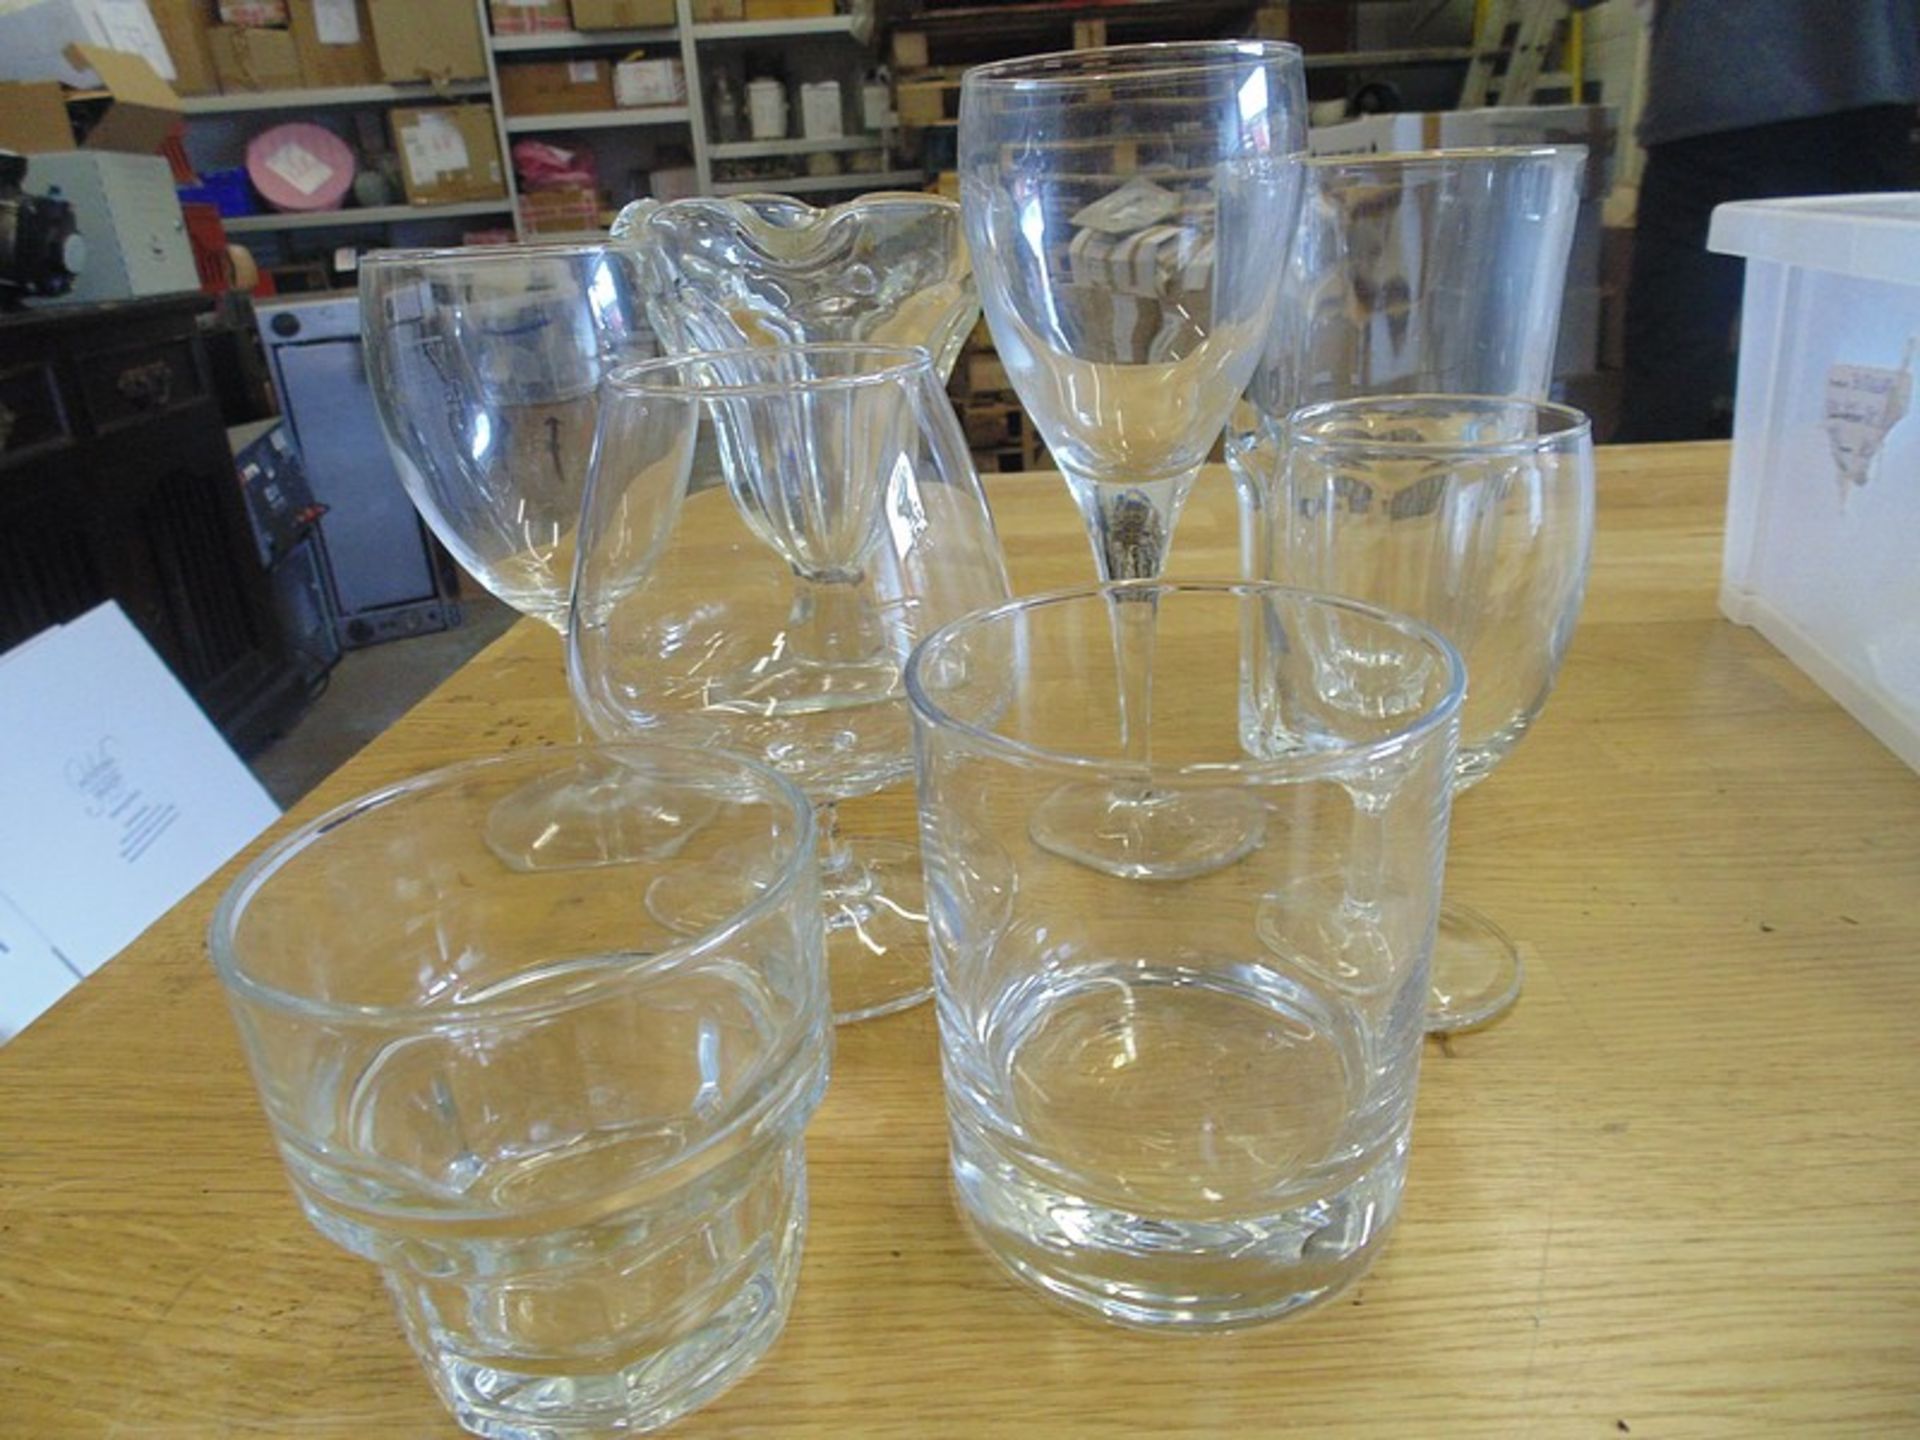 Job lot large quantity of glassware comprising of tumblers, wine goblets, shot glasses and cognac